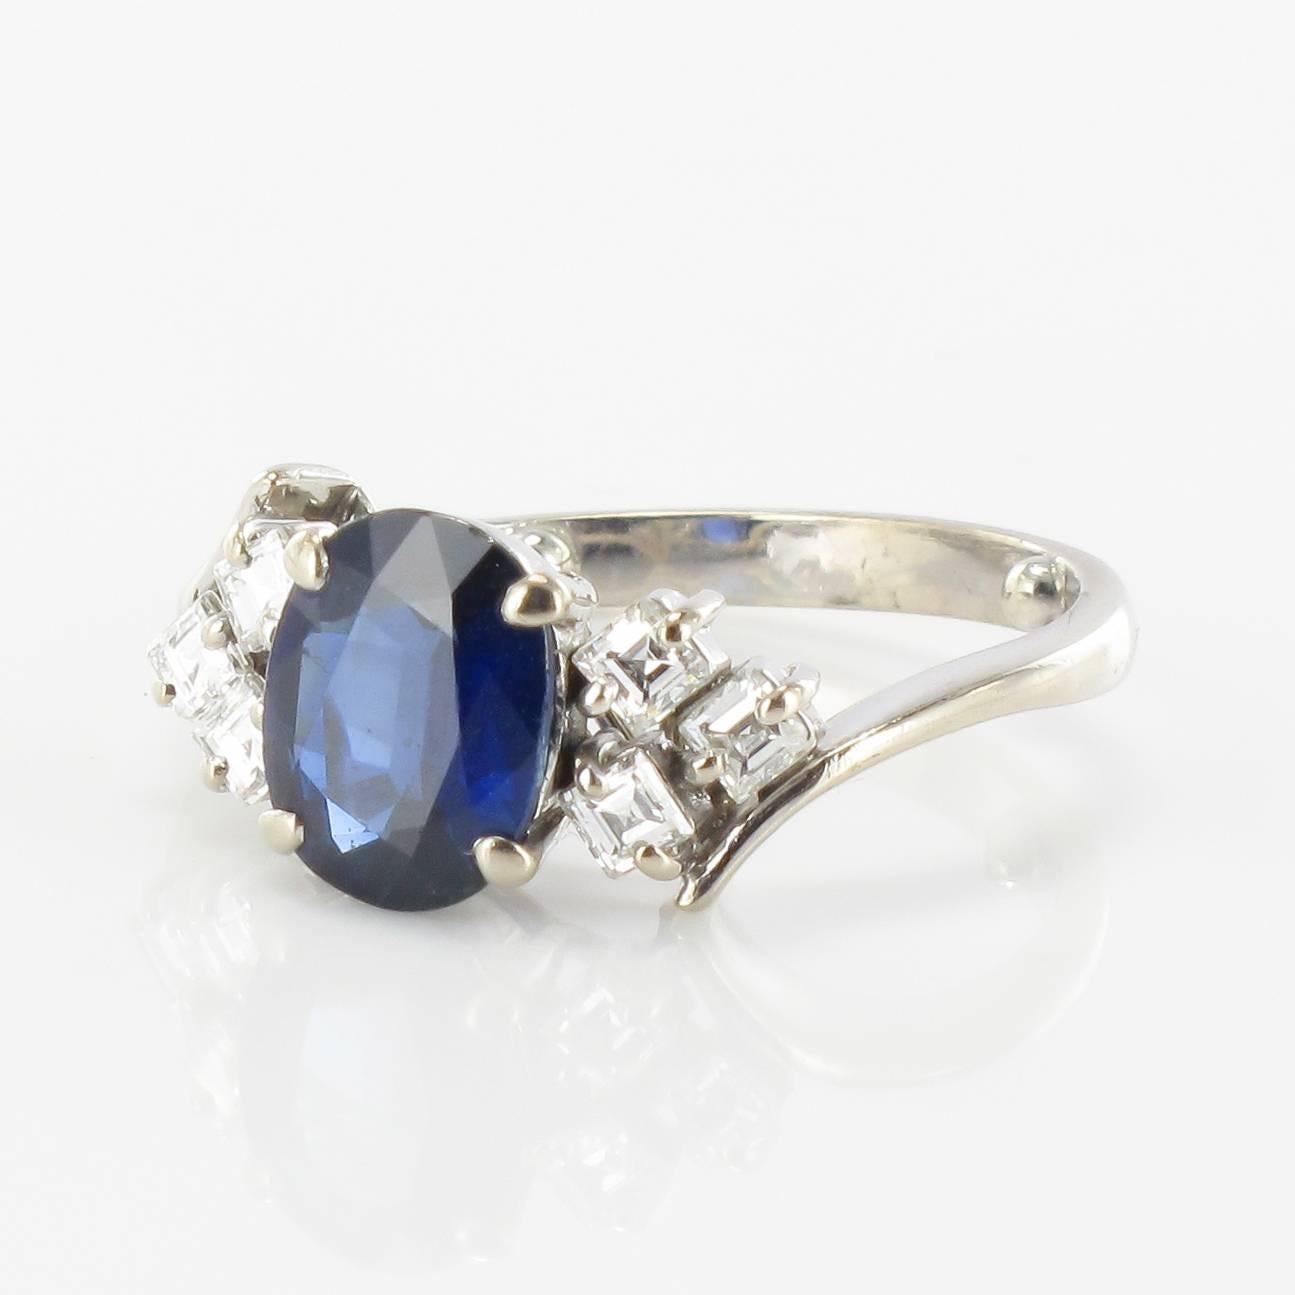 Ring in 18 carat white gold, eagle head hallmark.

This gorgeous white gold ring is claw set with an oval sapphire featuring 3 princess cut claw set diamonds at each side. 
The beginning of the ring band is asymmetric.  

Total weight of the